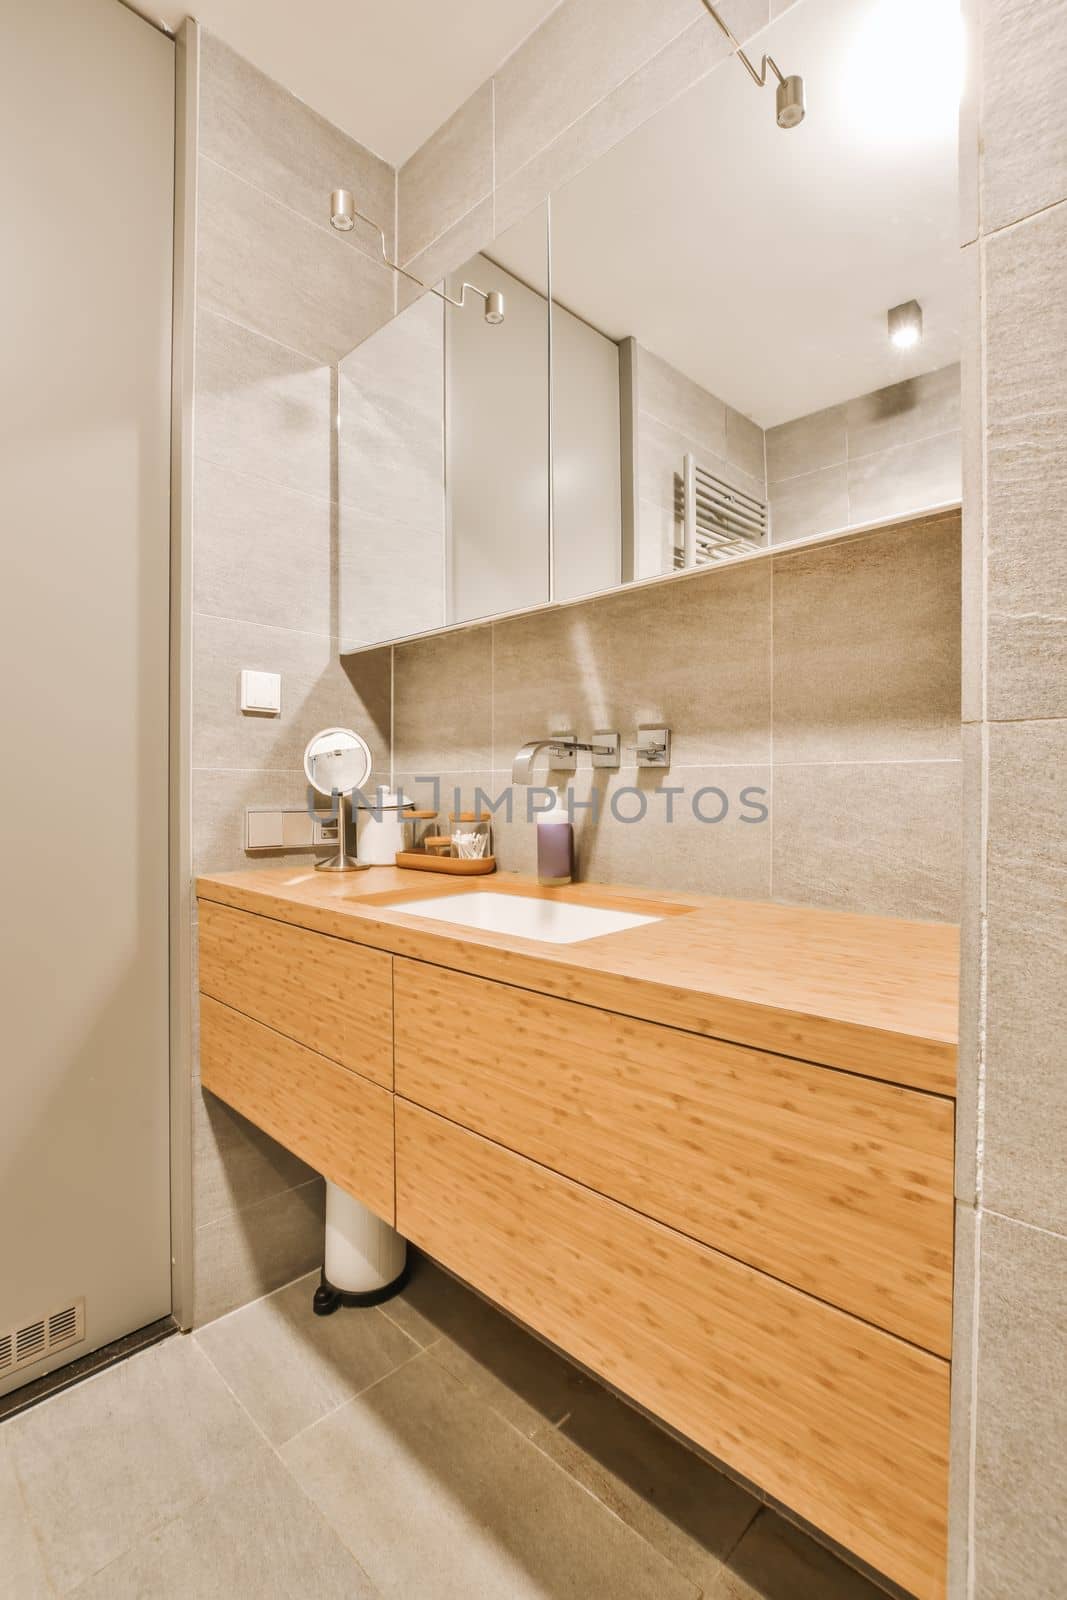 a modern bathroom with wood cabinets and mirrors on the wall, along with a white toilet in the corner next to the sink